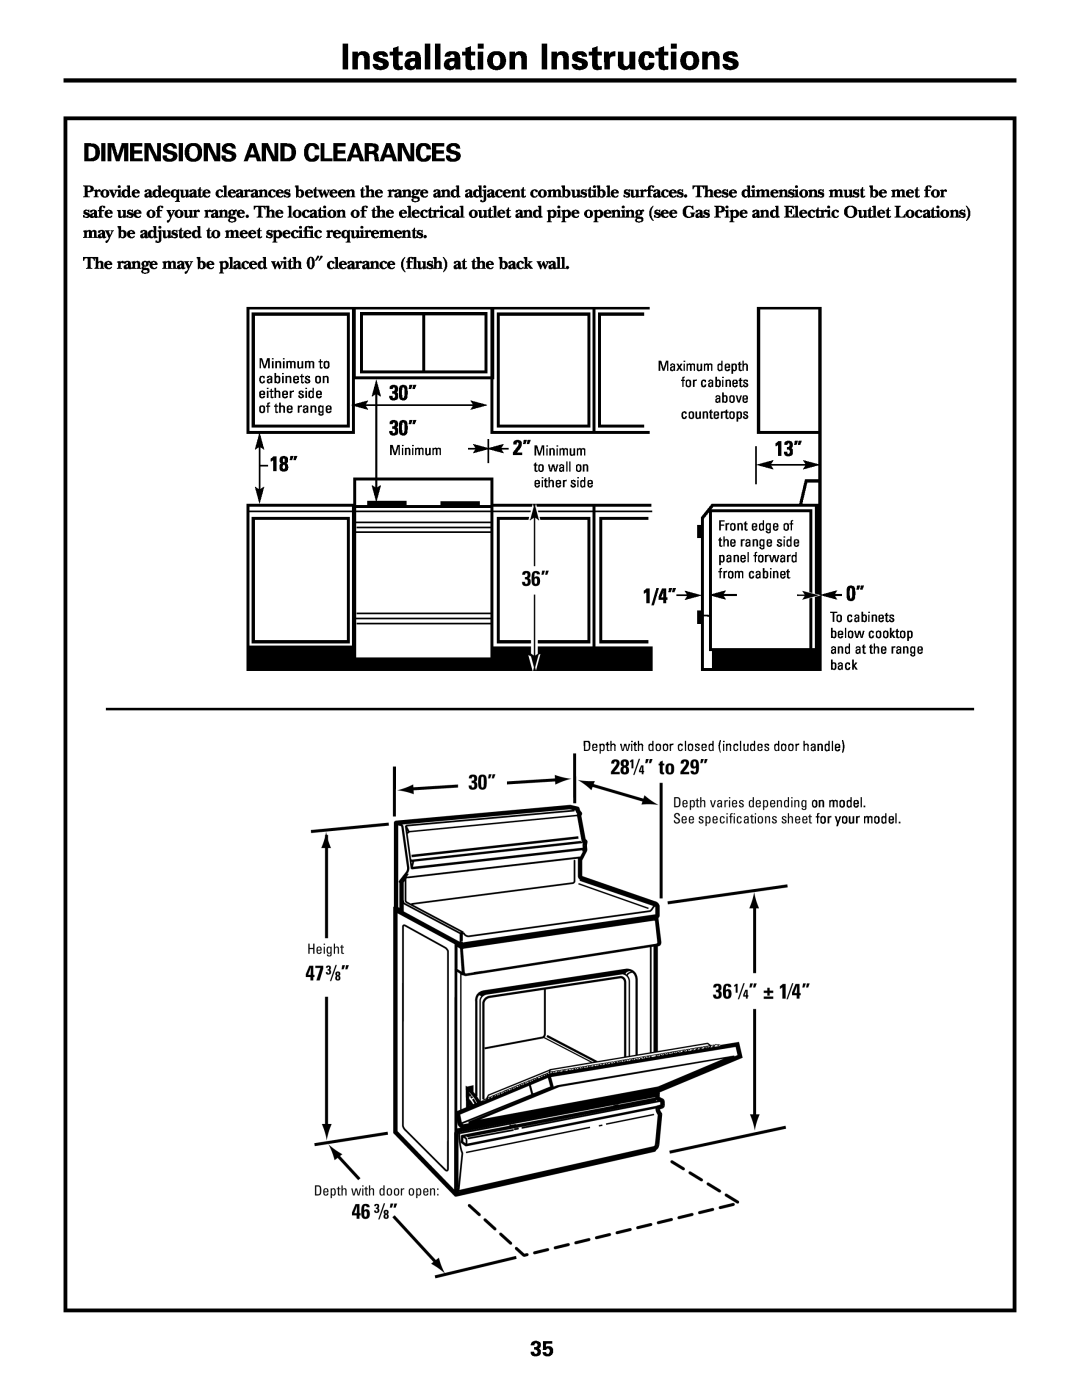 GE JGBP83 manual Dimensions And Clearances, 1/4” 0”, 281⁄4” to 29” 30”, 36 1⁄4” ± 1⁄4”, 46 3⁄8”, Installation Instructions 